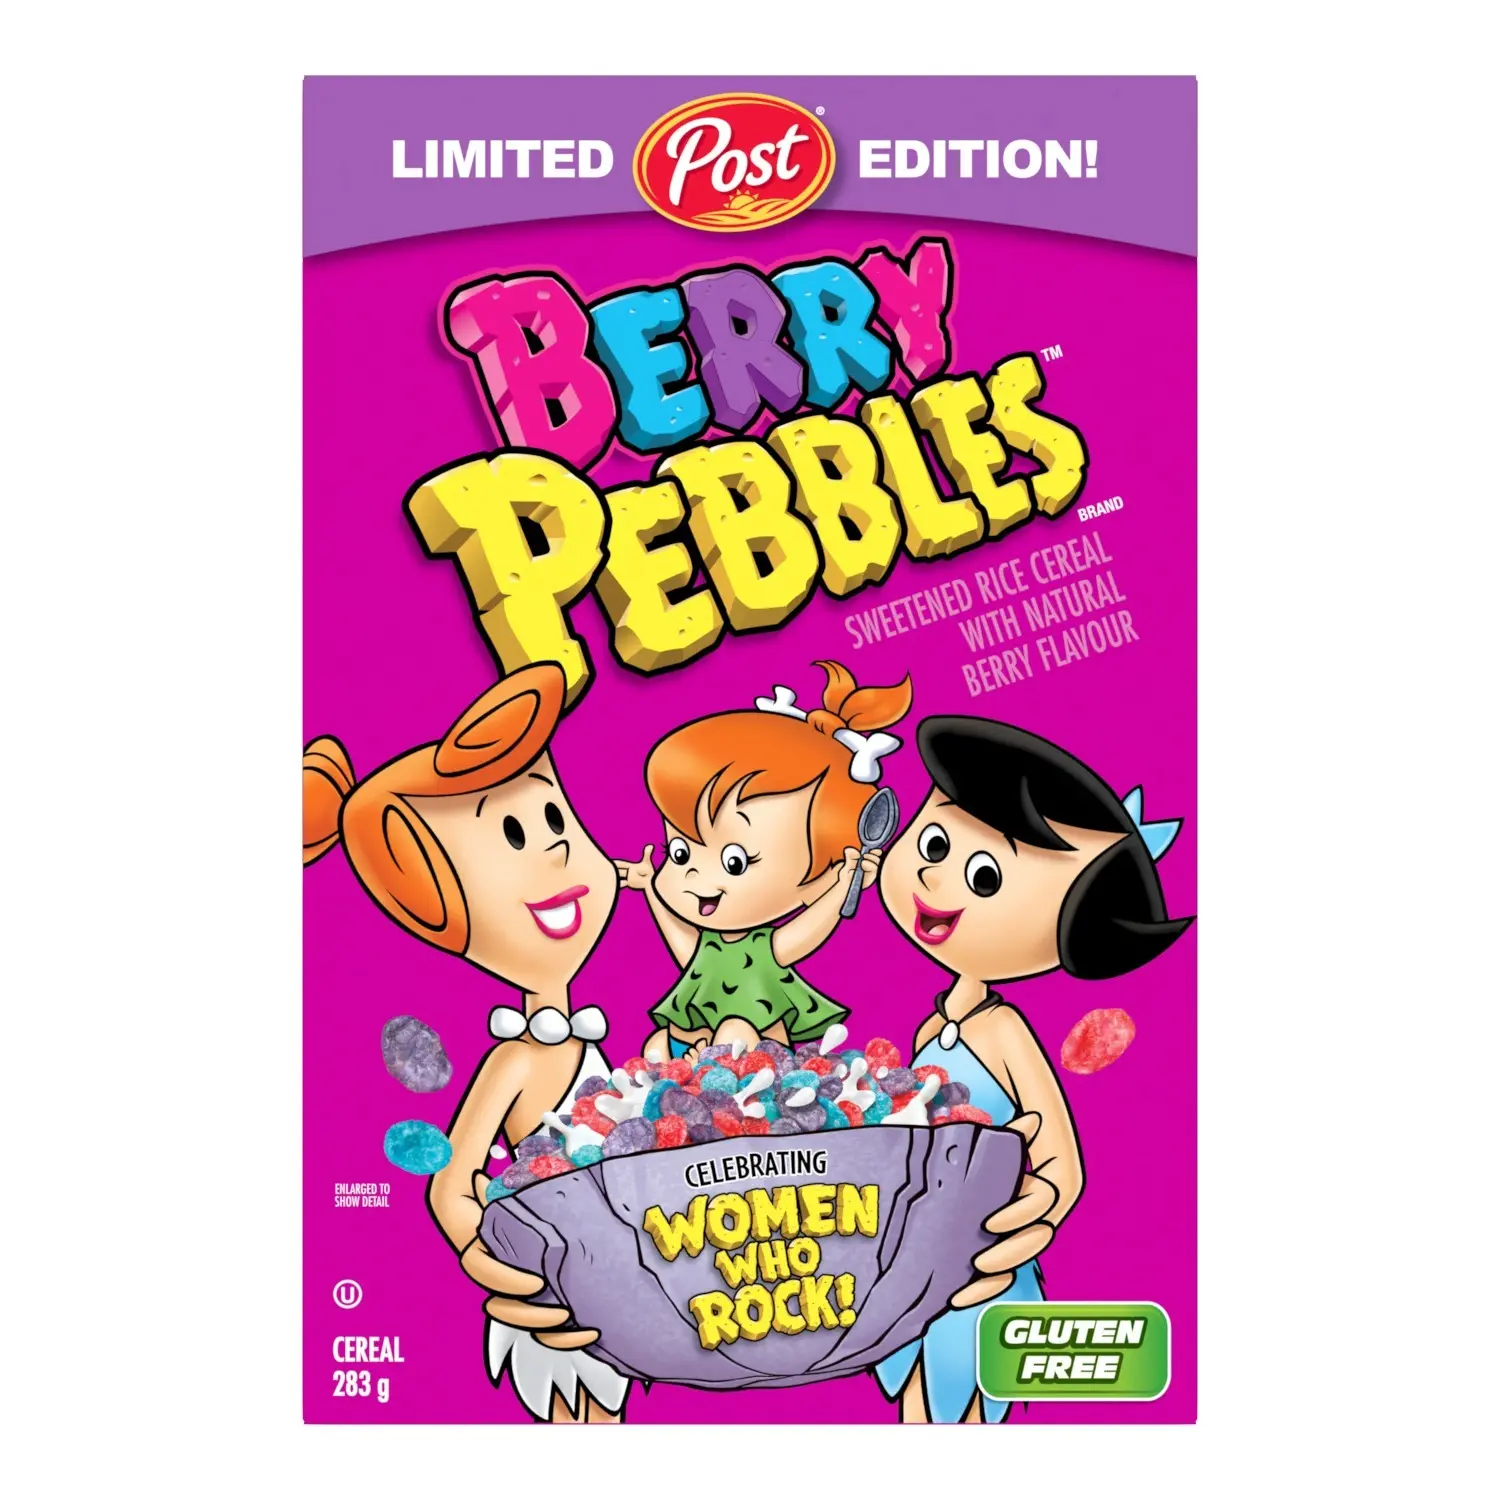 Berry PEBBLES cereal box